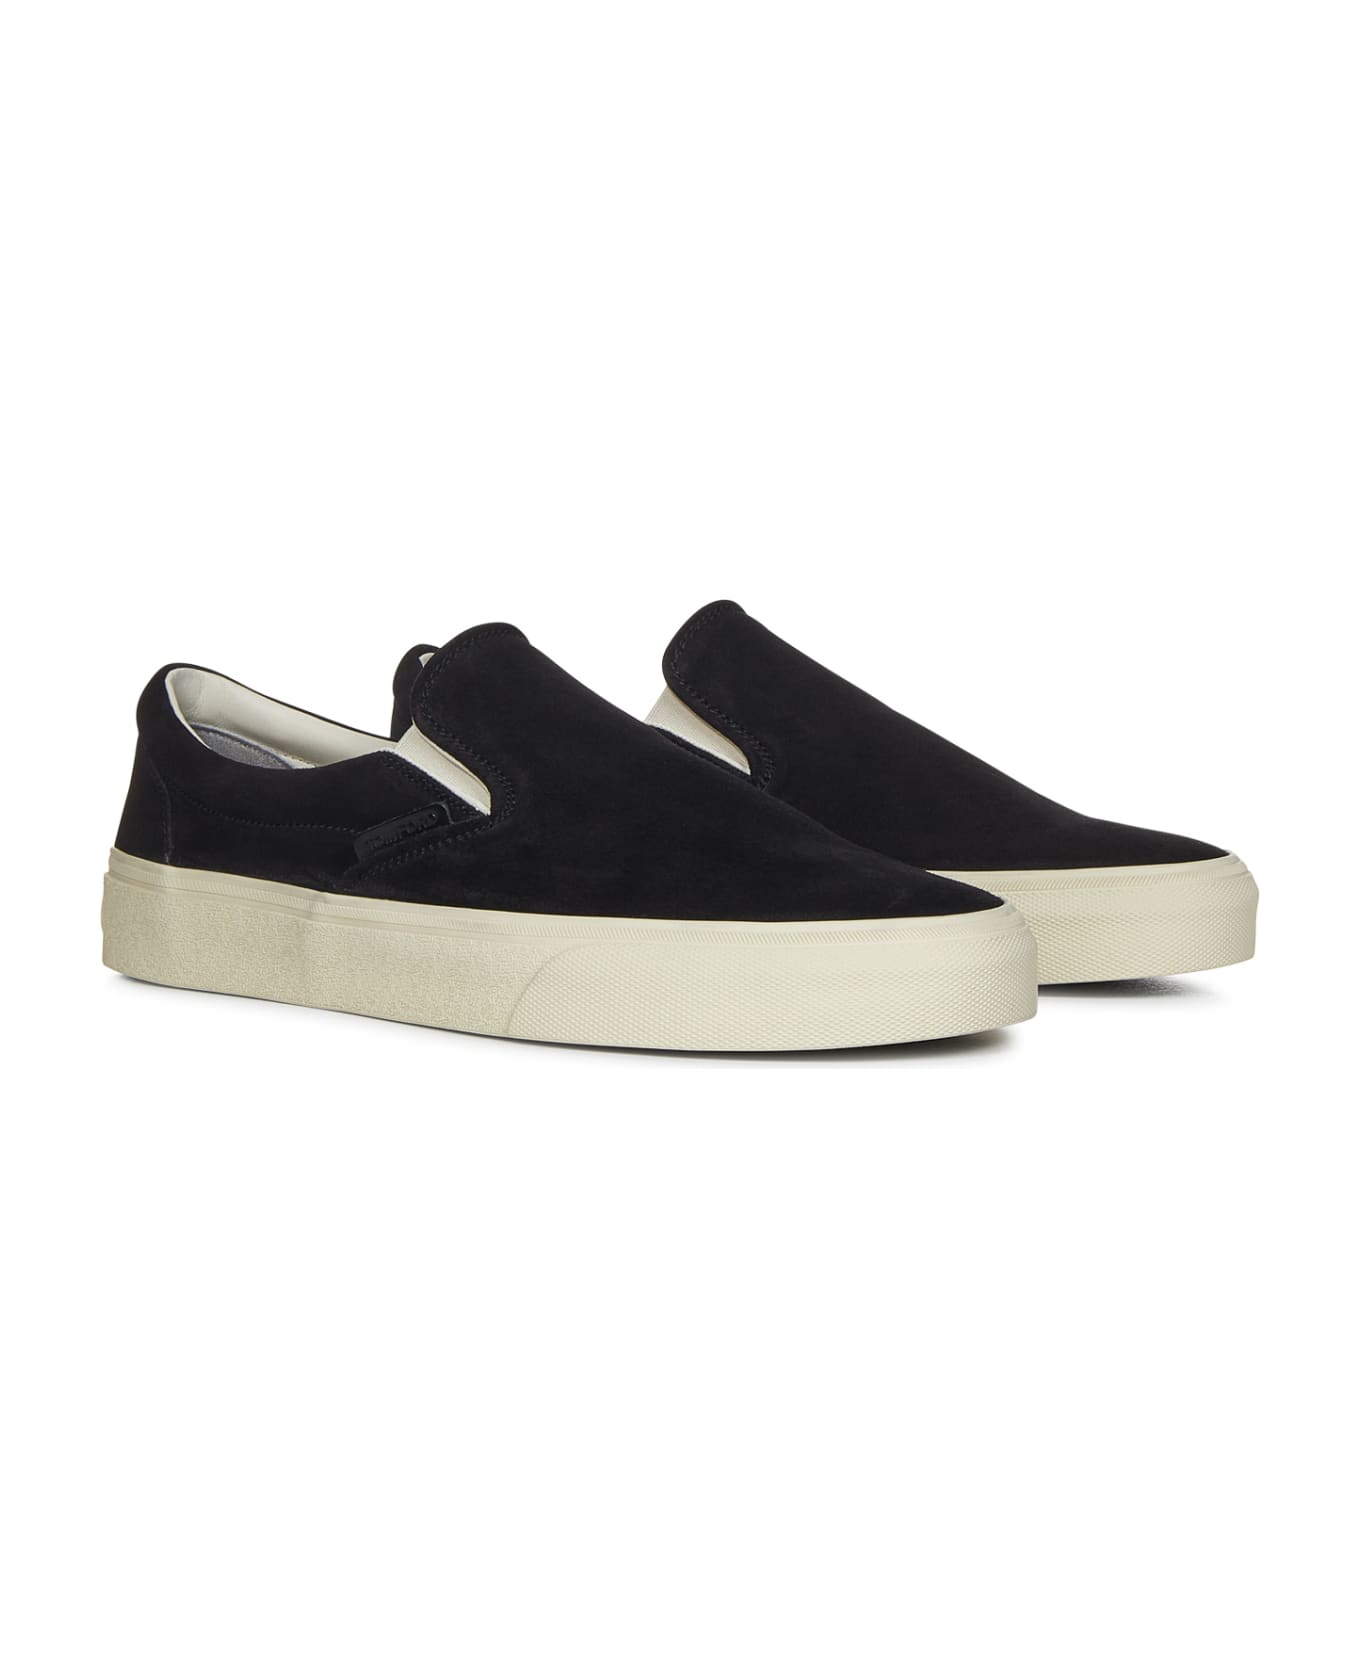 Tom Ford Sneakers - BLACK/NEUTRALS